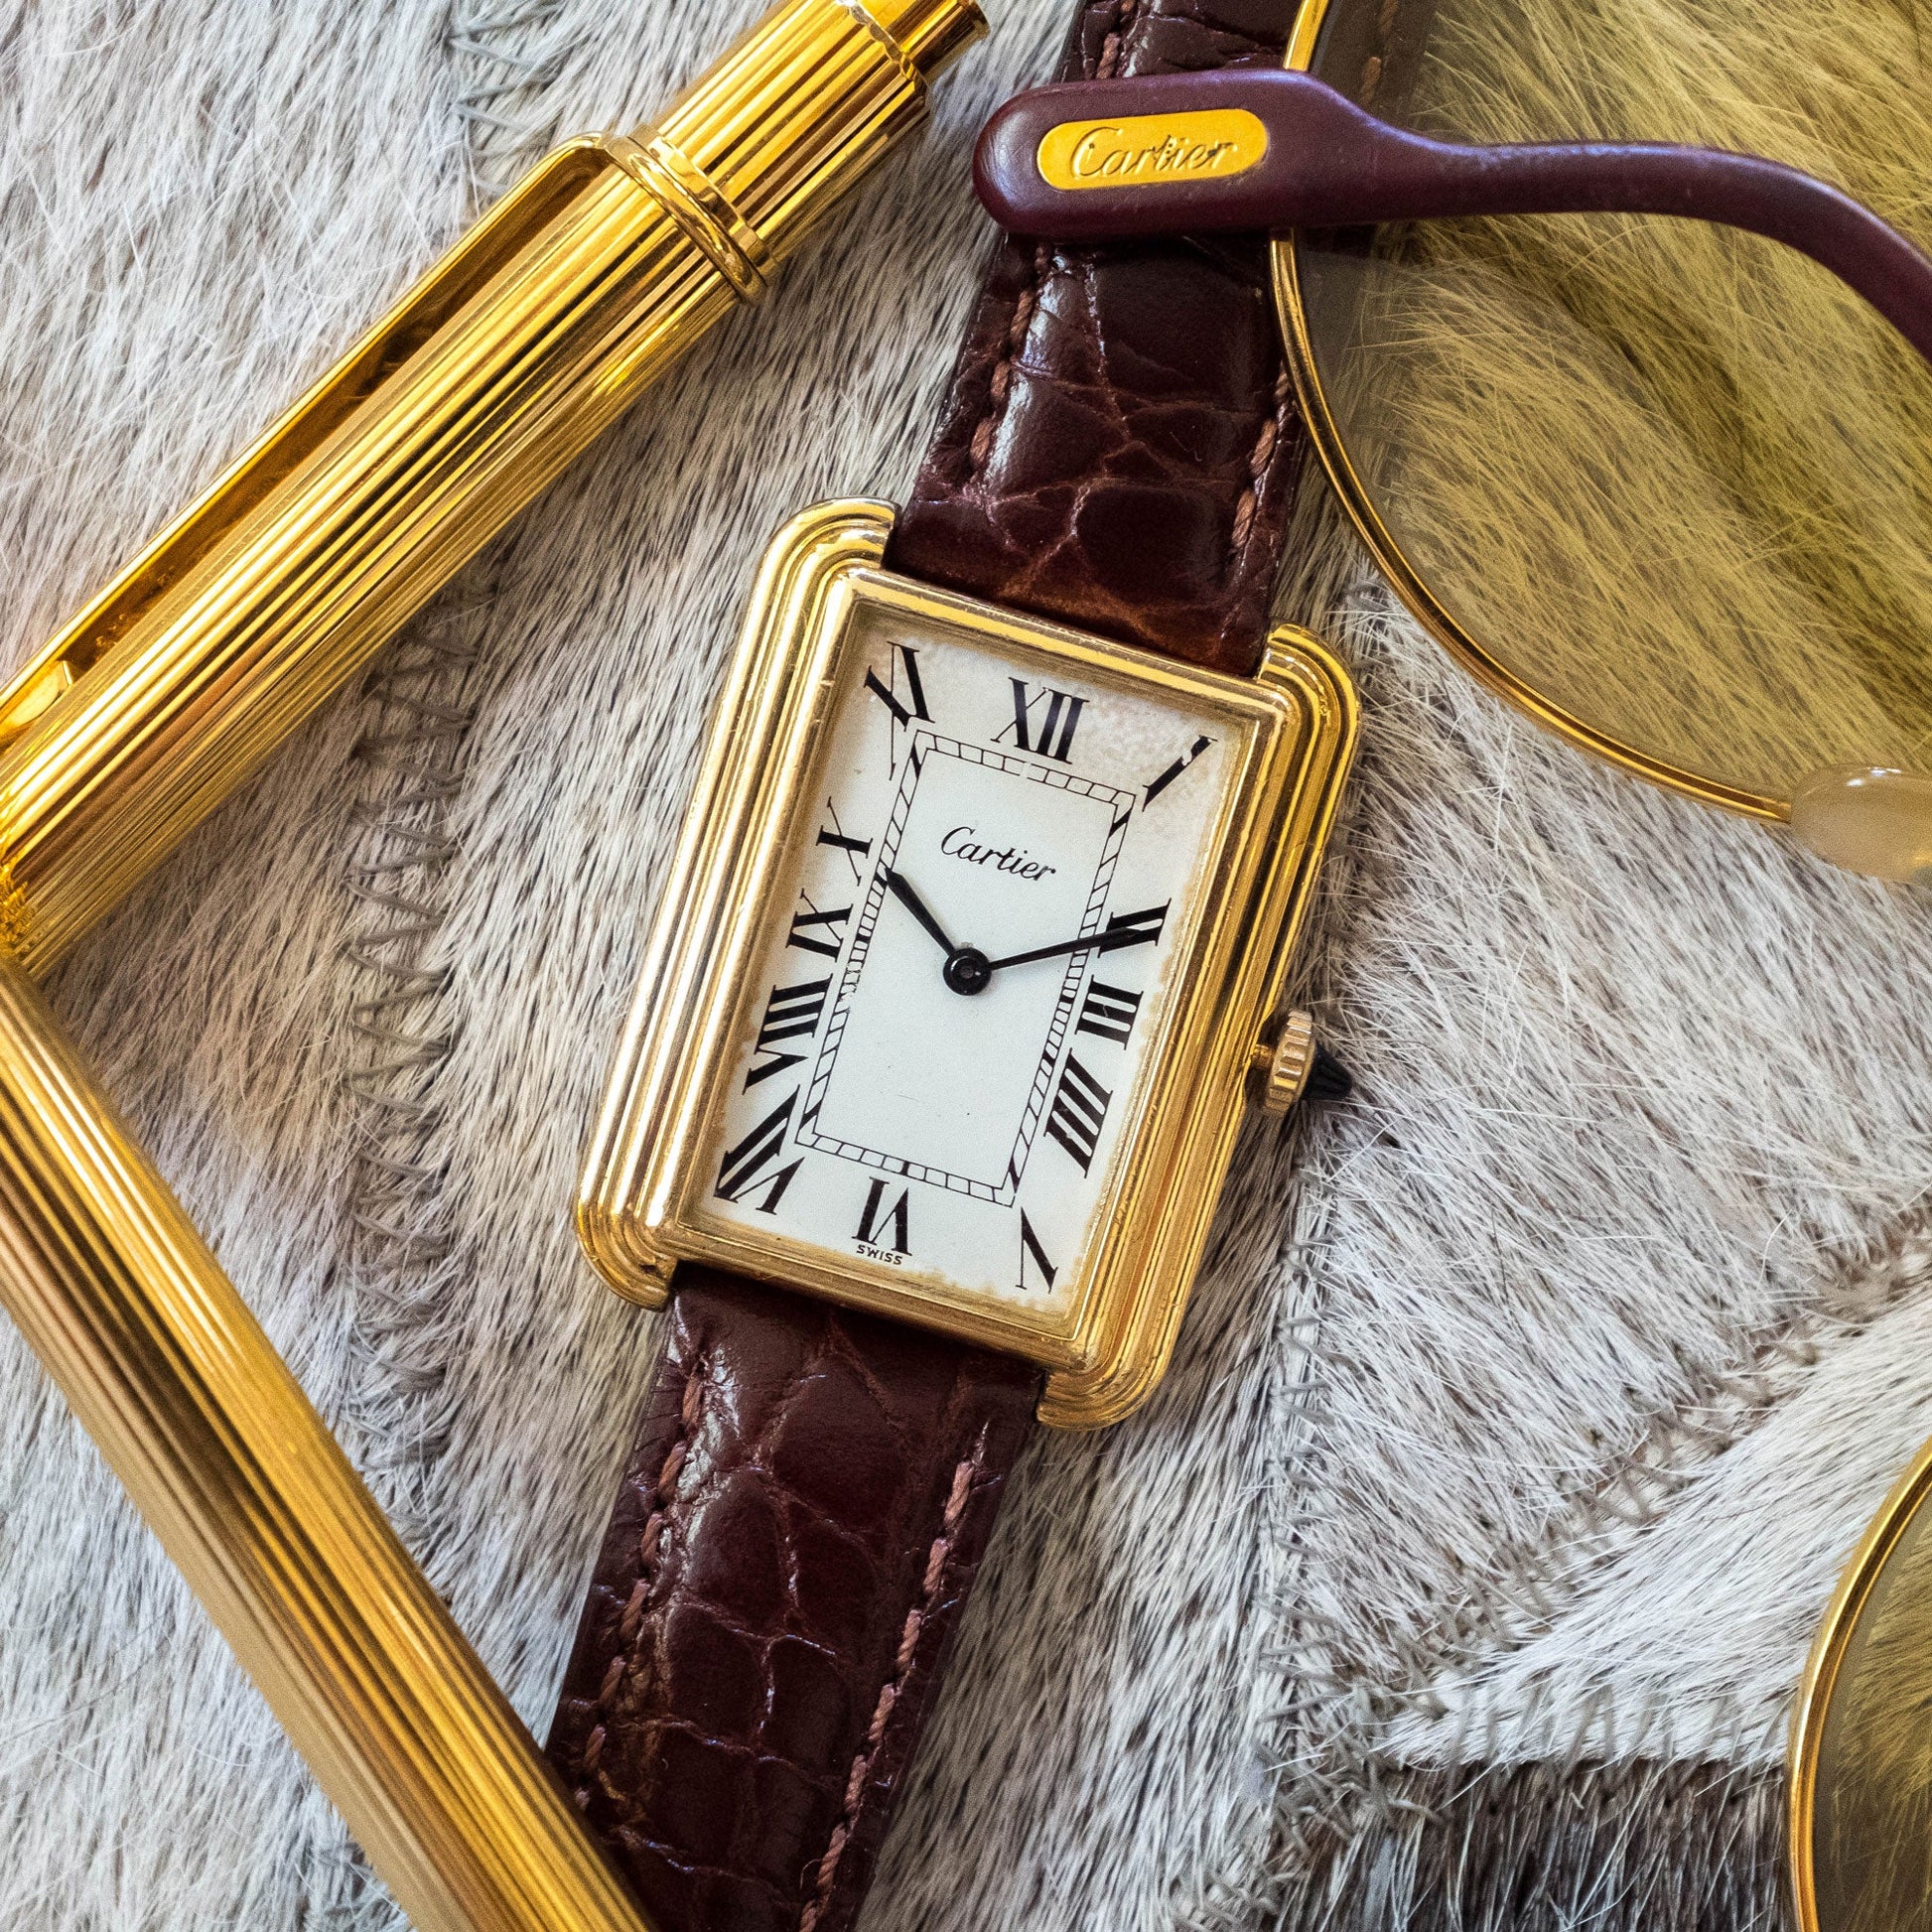 Cartier Stepped Case Jumbo 1970s Vintage Watch | Relojes Vintage Mexico ...